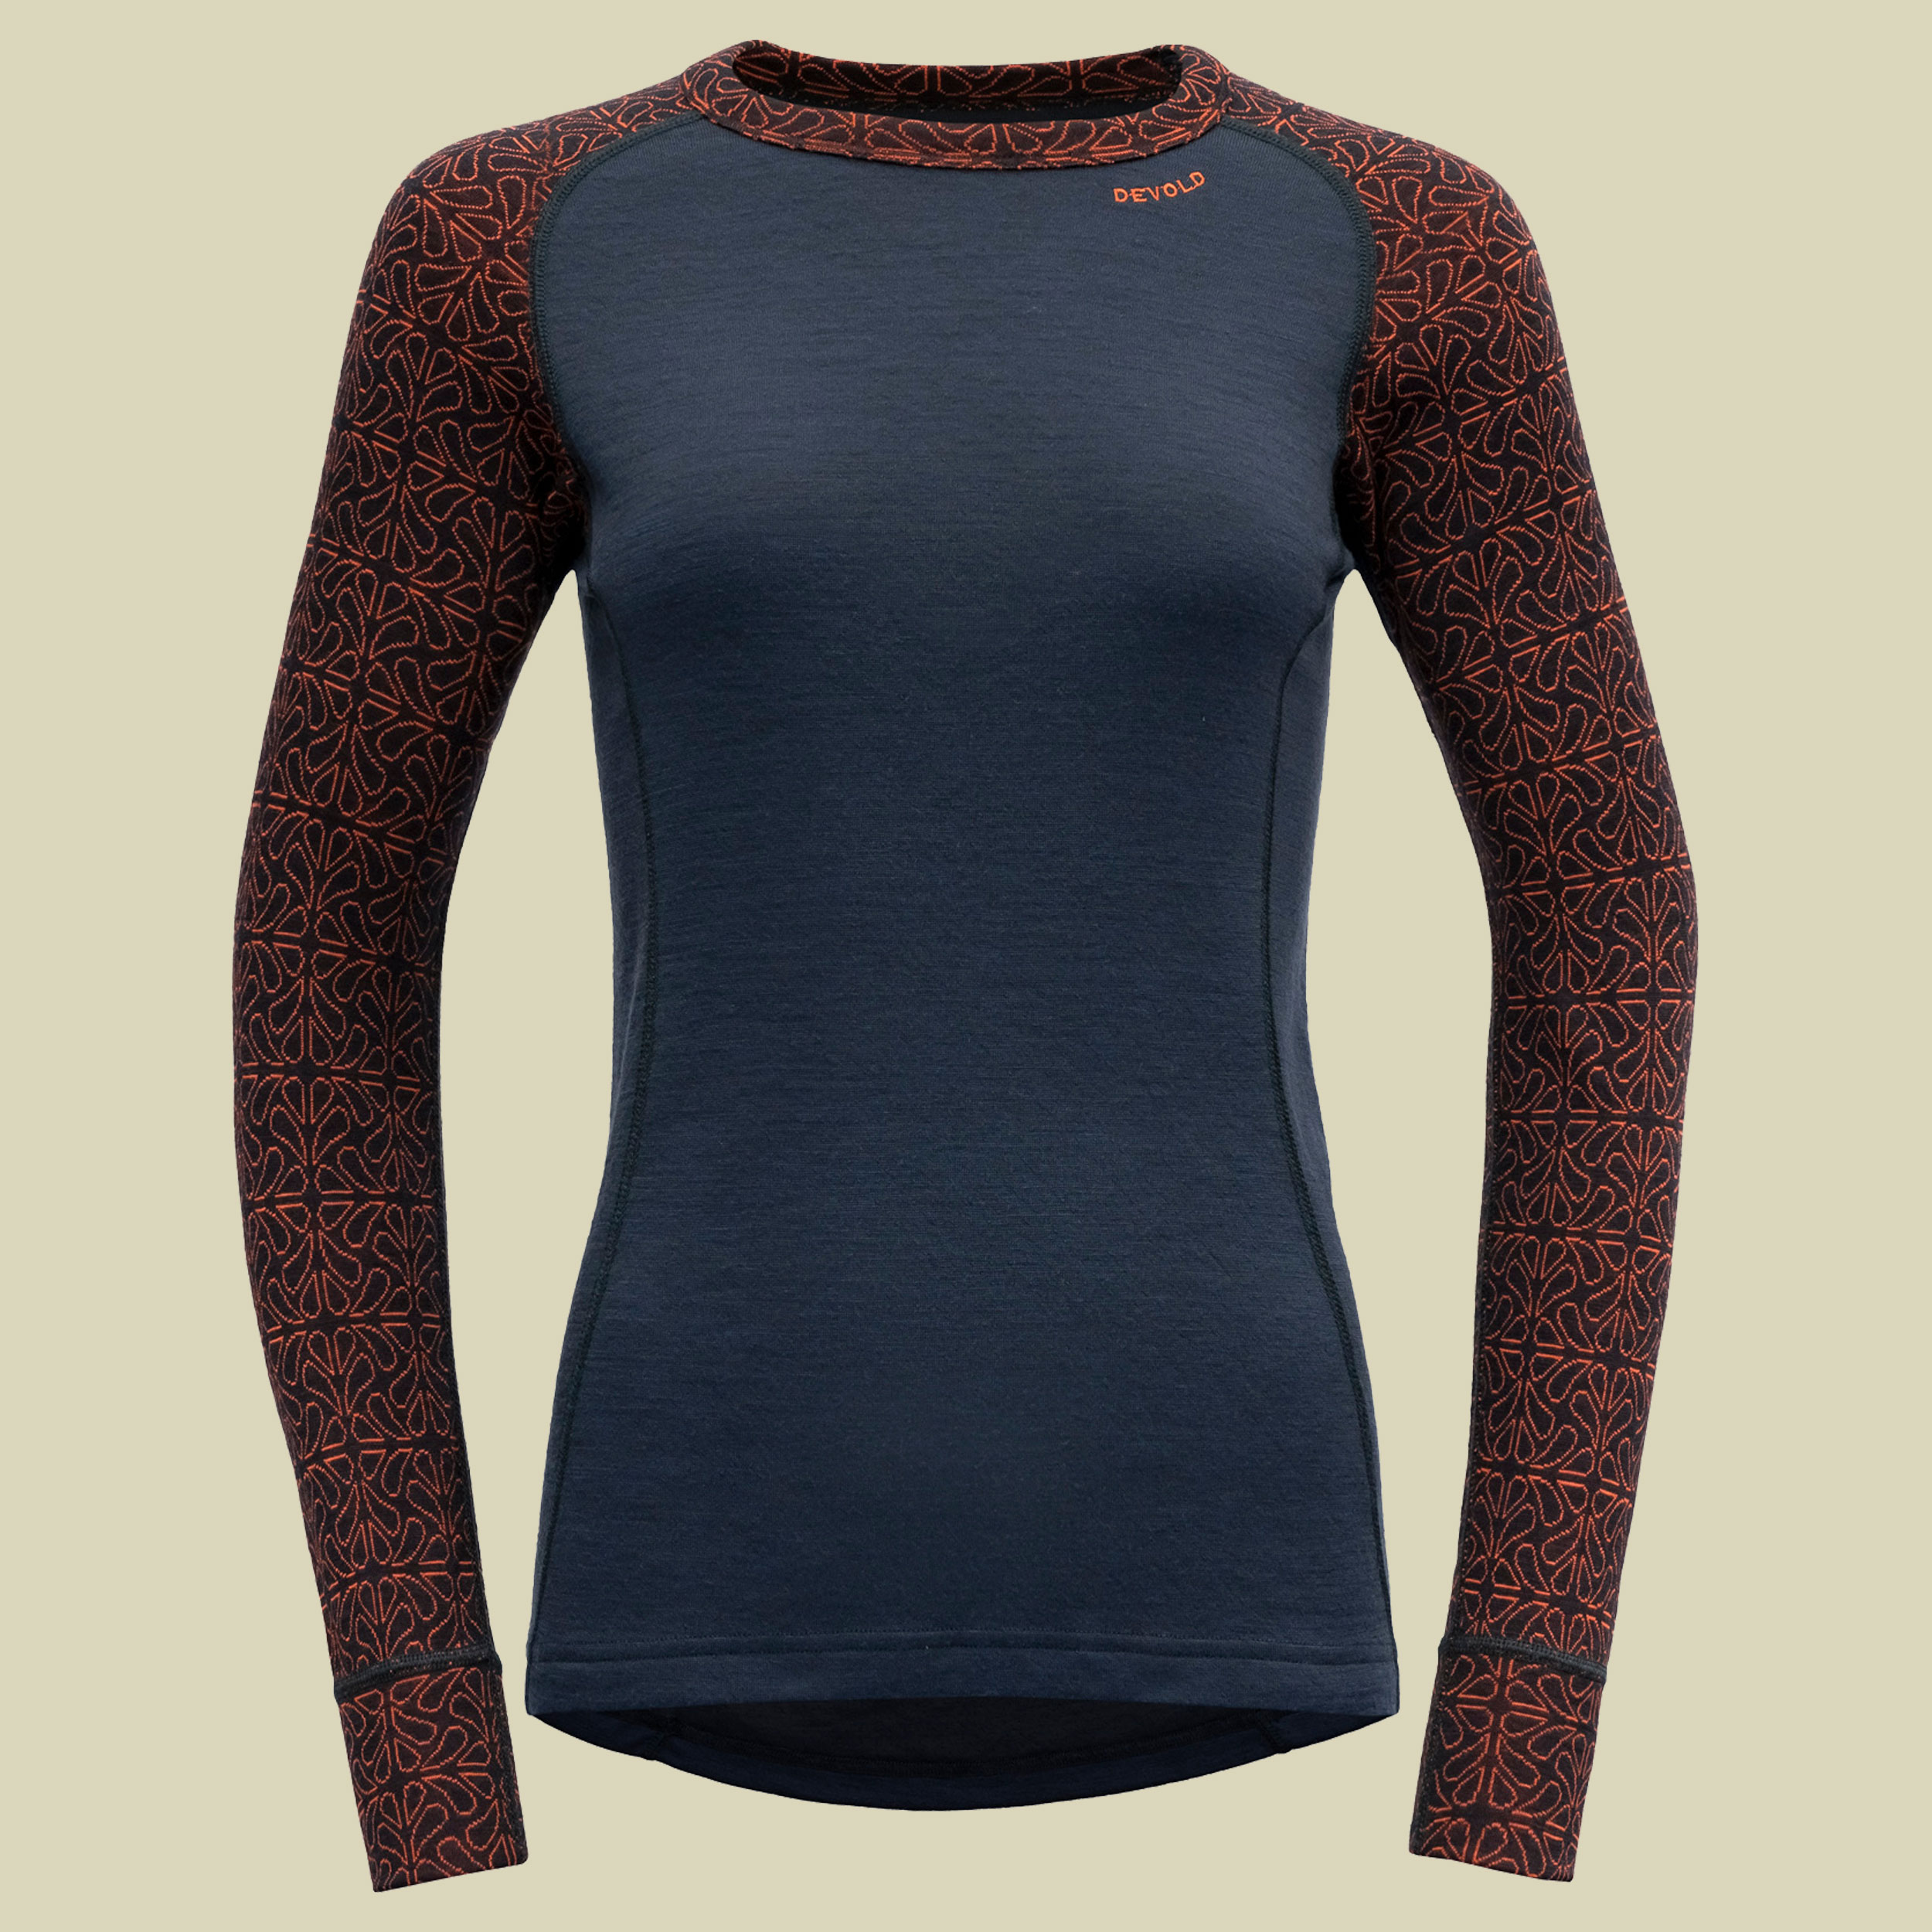 Duo Active Merino 205 Shirt Woman Größe L  Farbe ink